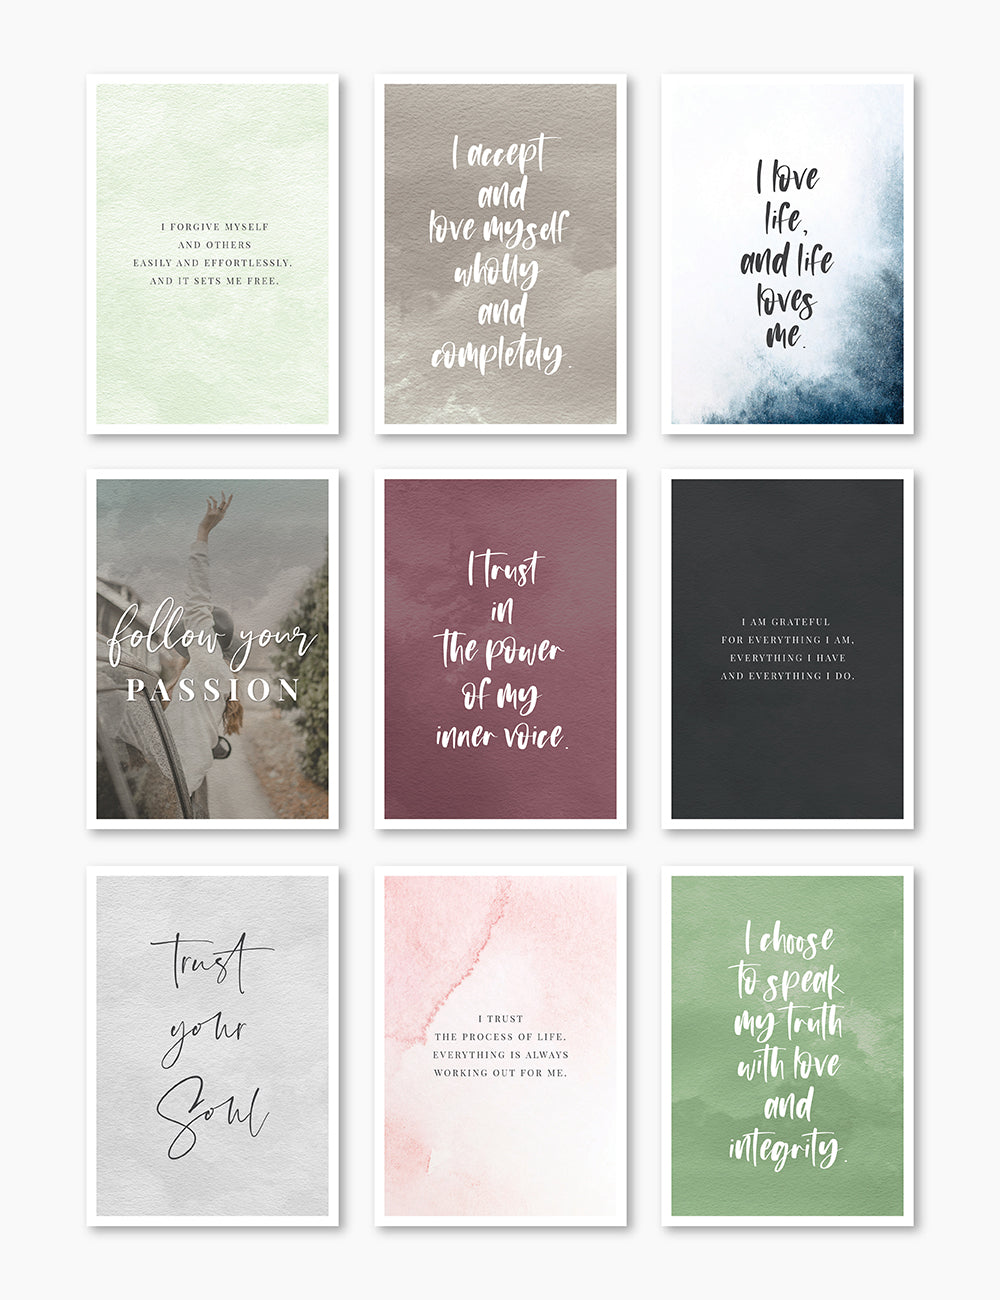 Printable Vision Board Kit 02: Affirmation Cards and Inspirational Quotes